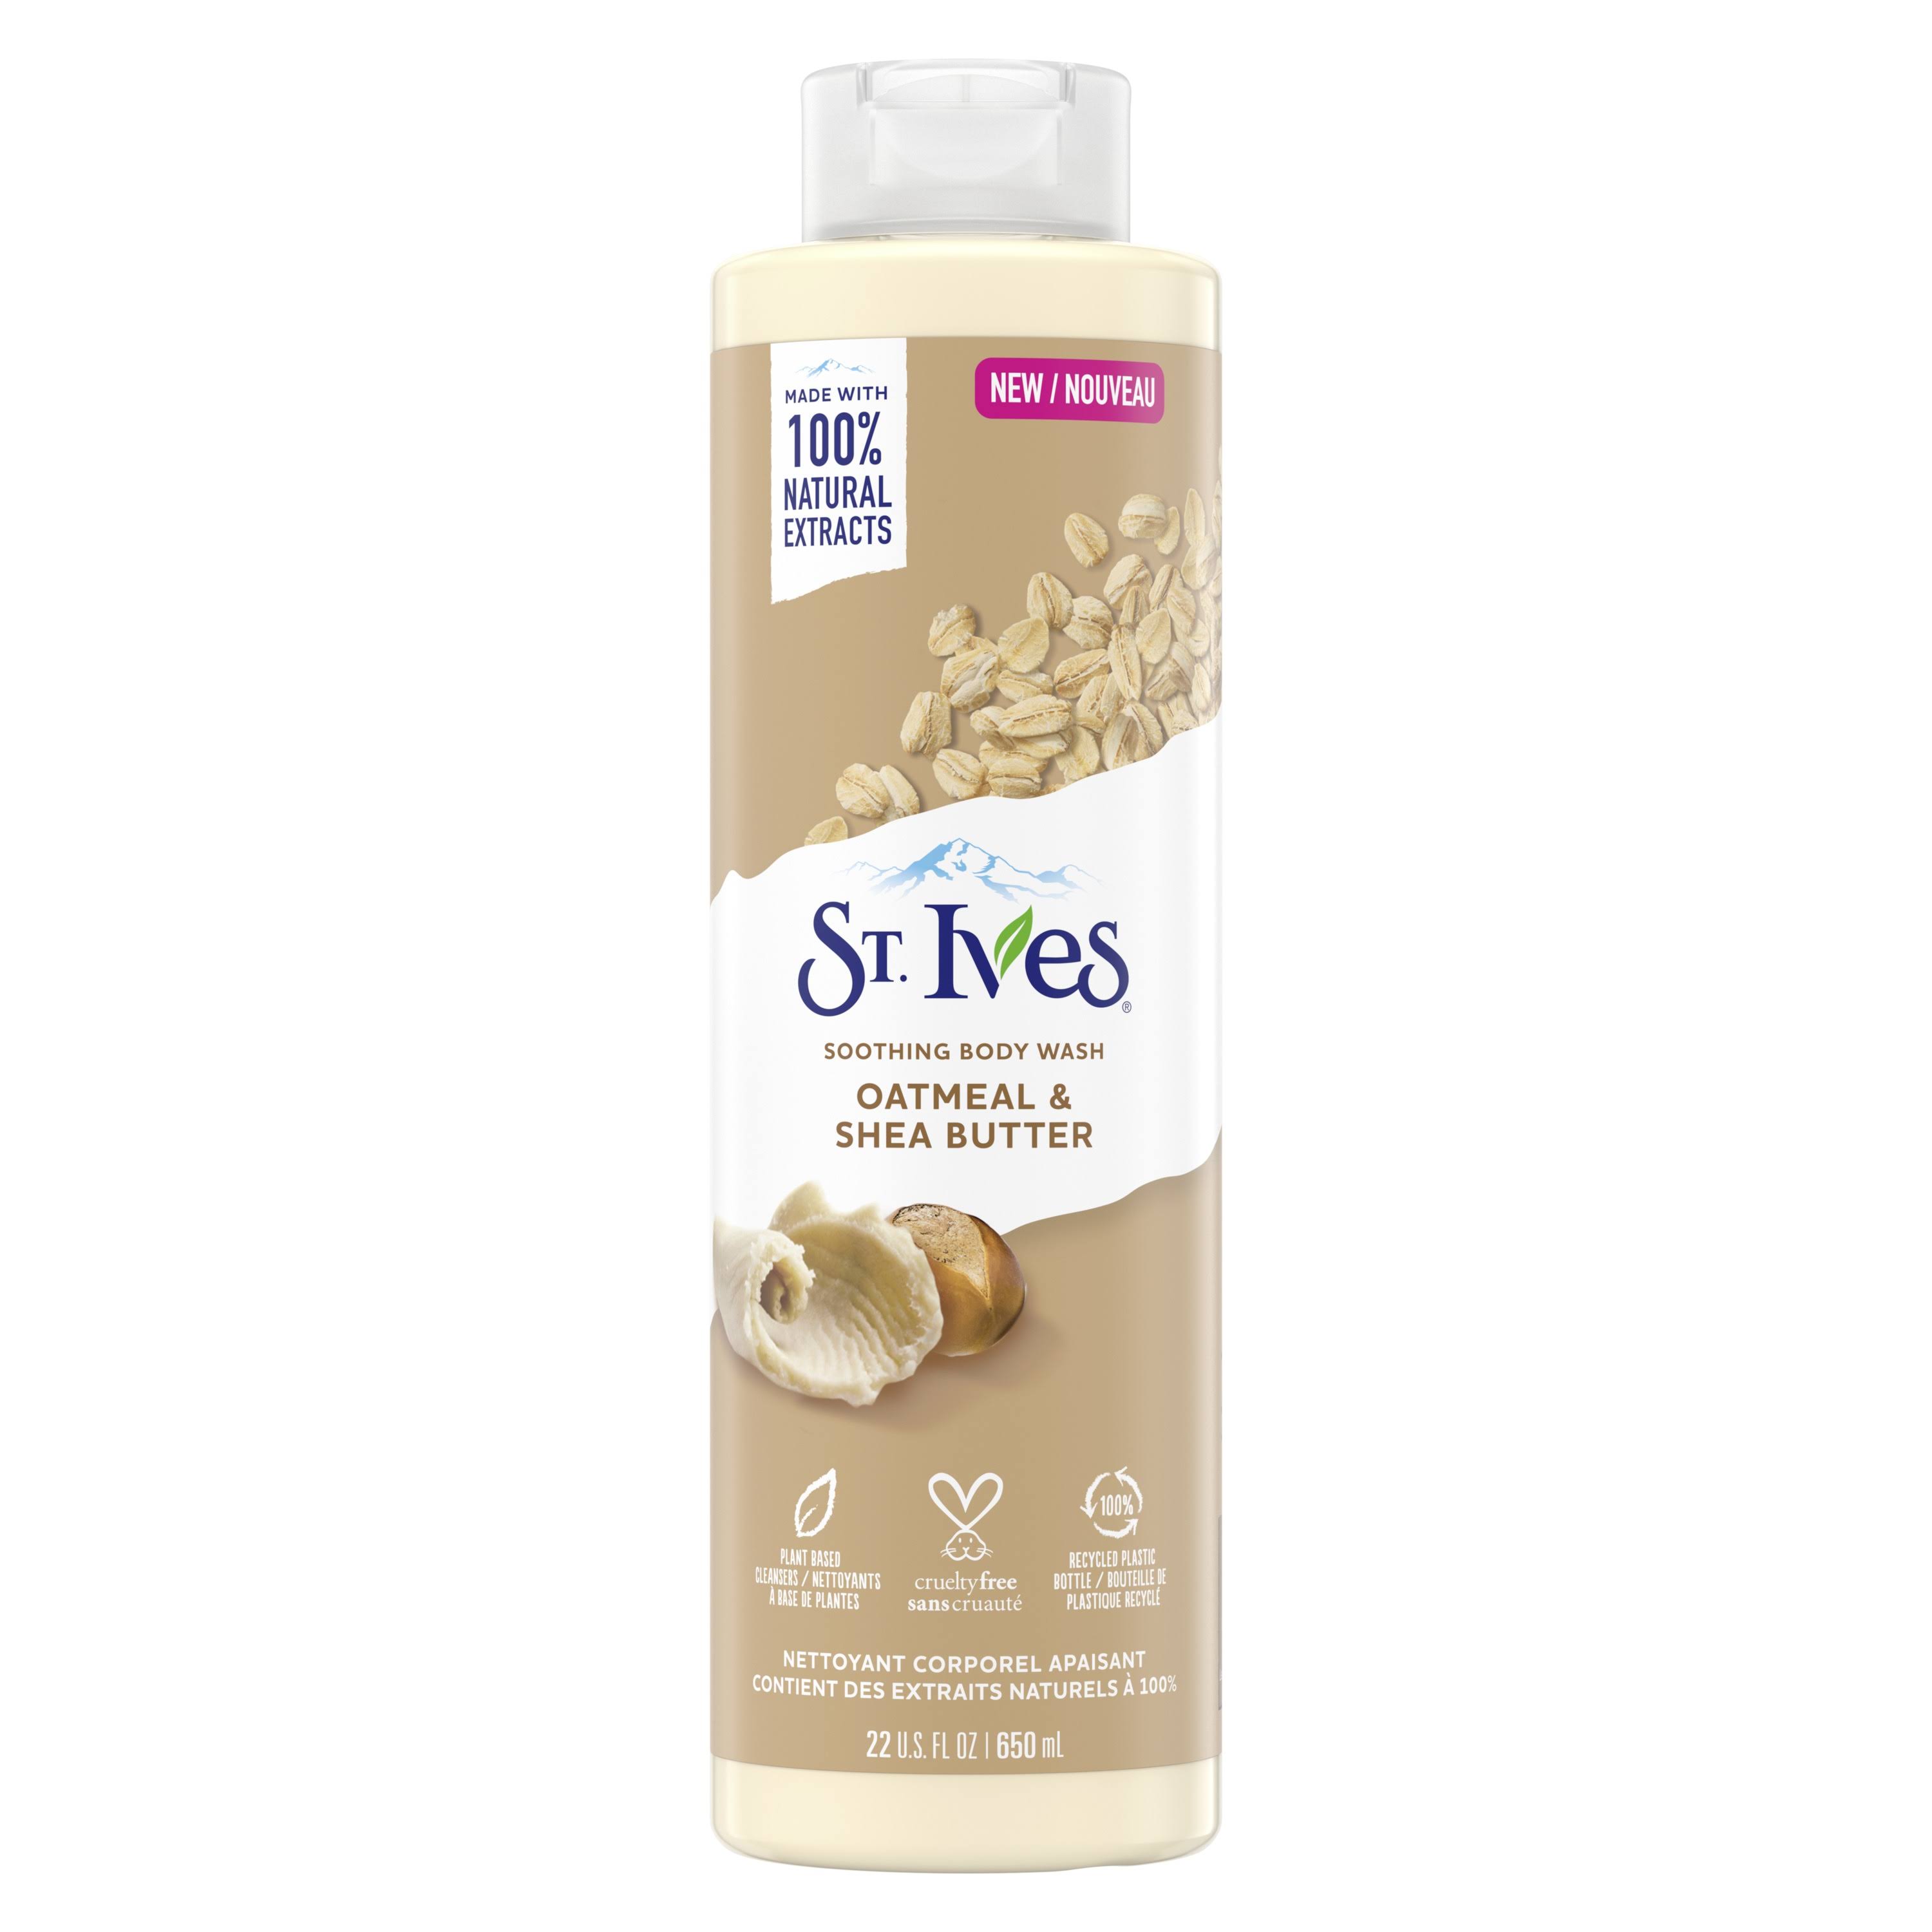 St. ives soothing body wash, oatmeal and shea butter, 22 oz